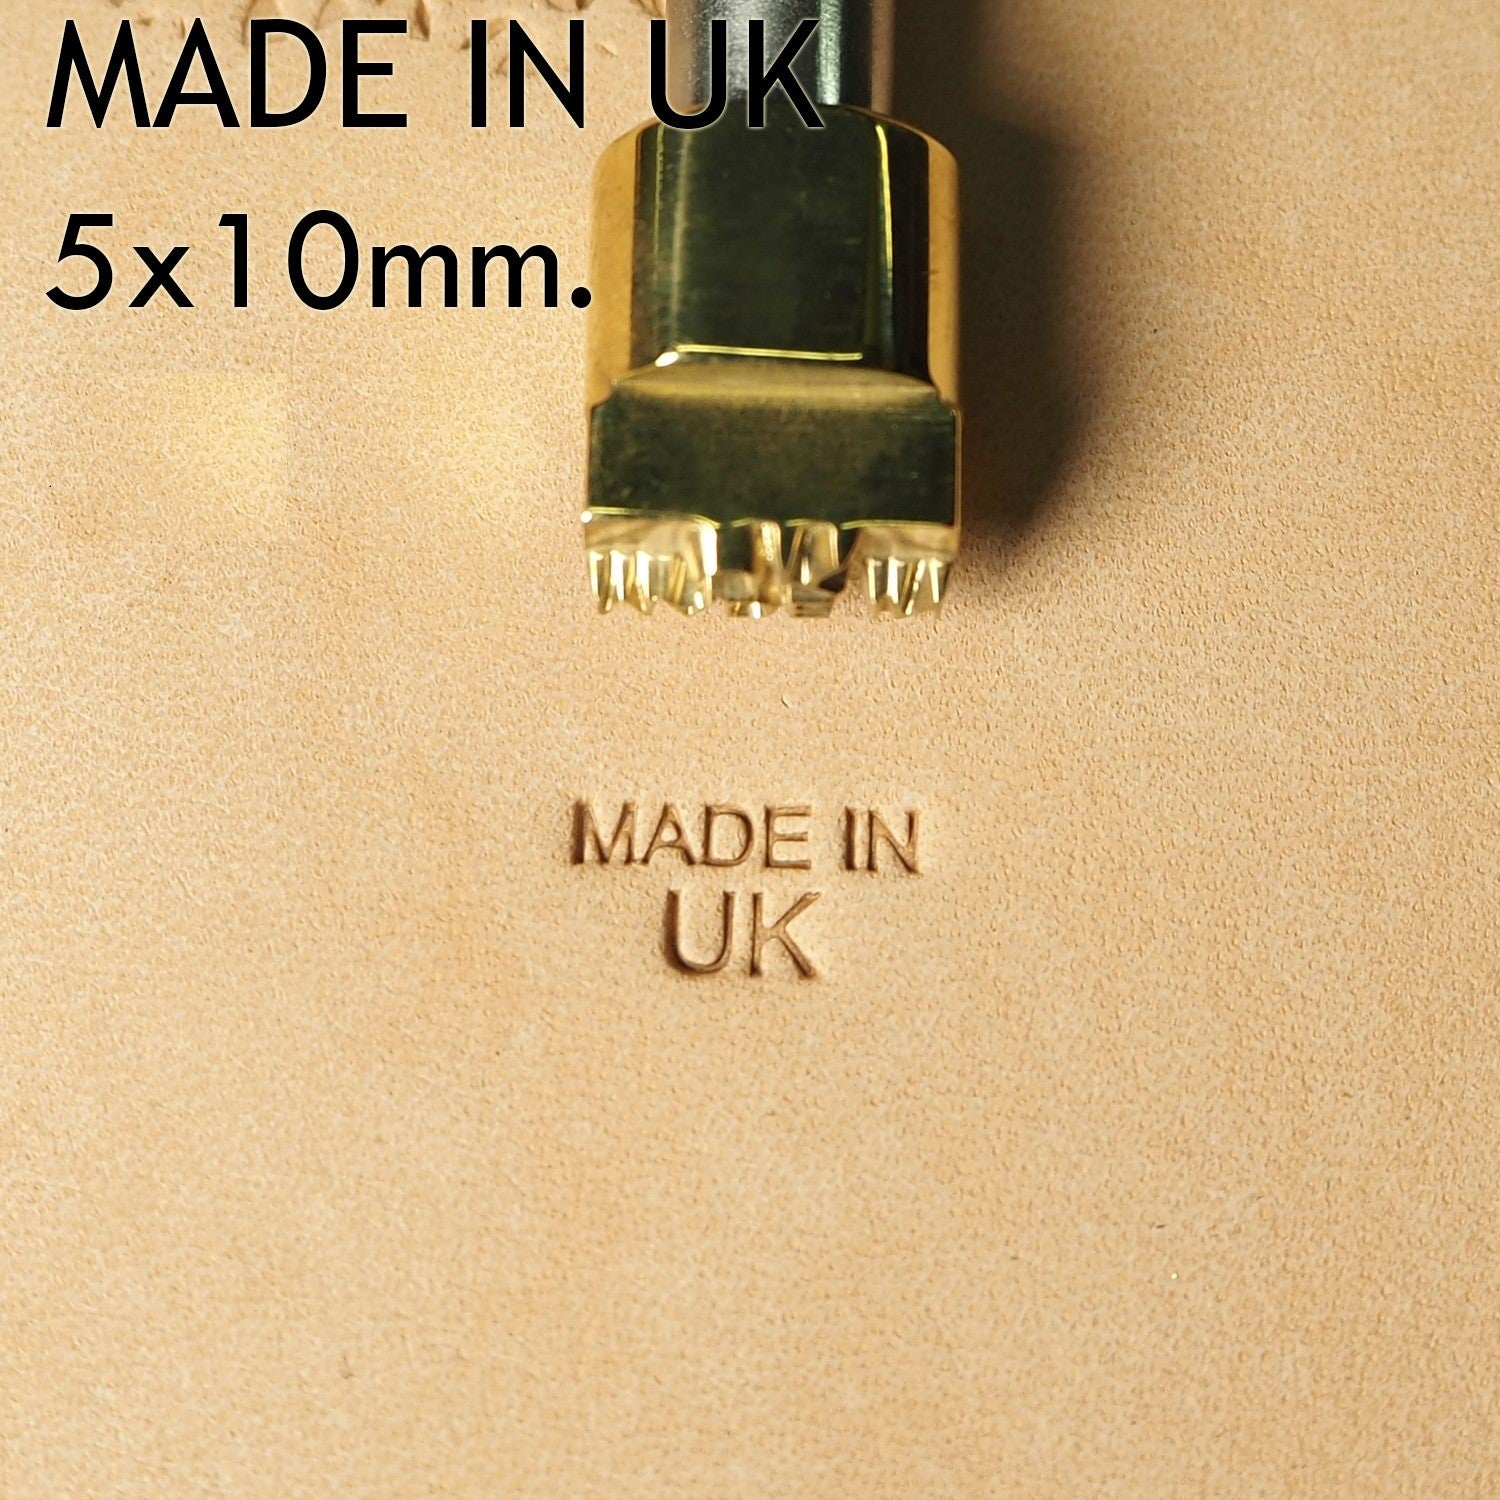 #Made In UK - Leather Crafting Stamp Tool